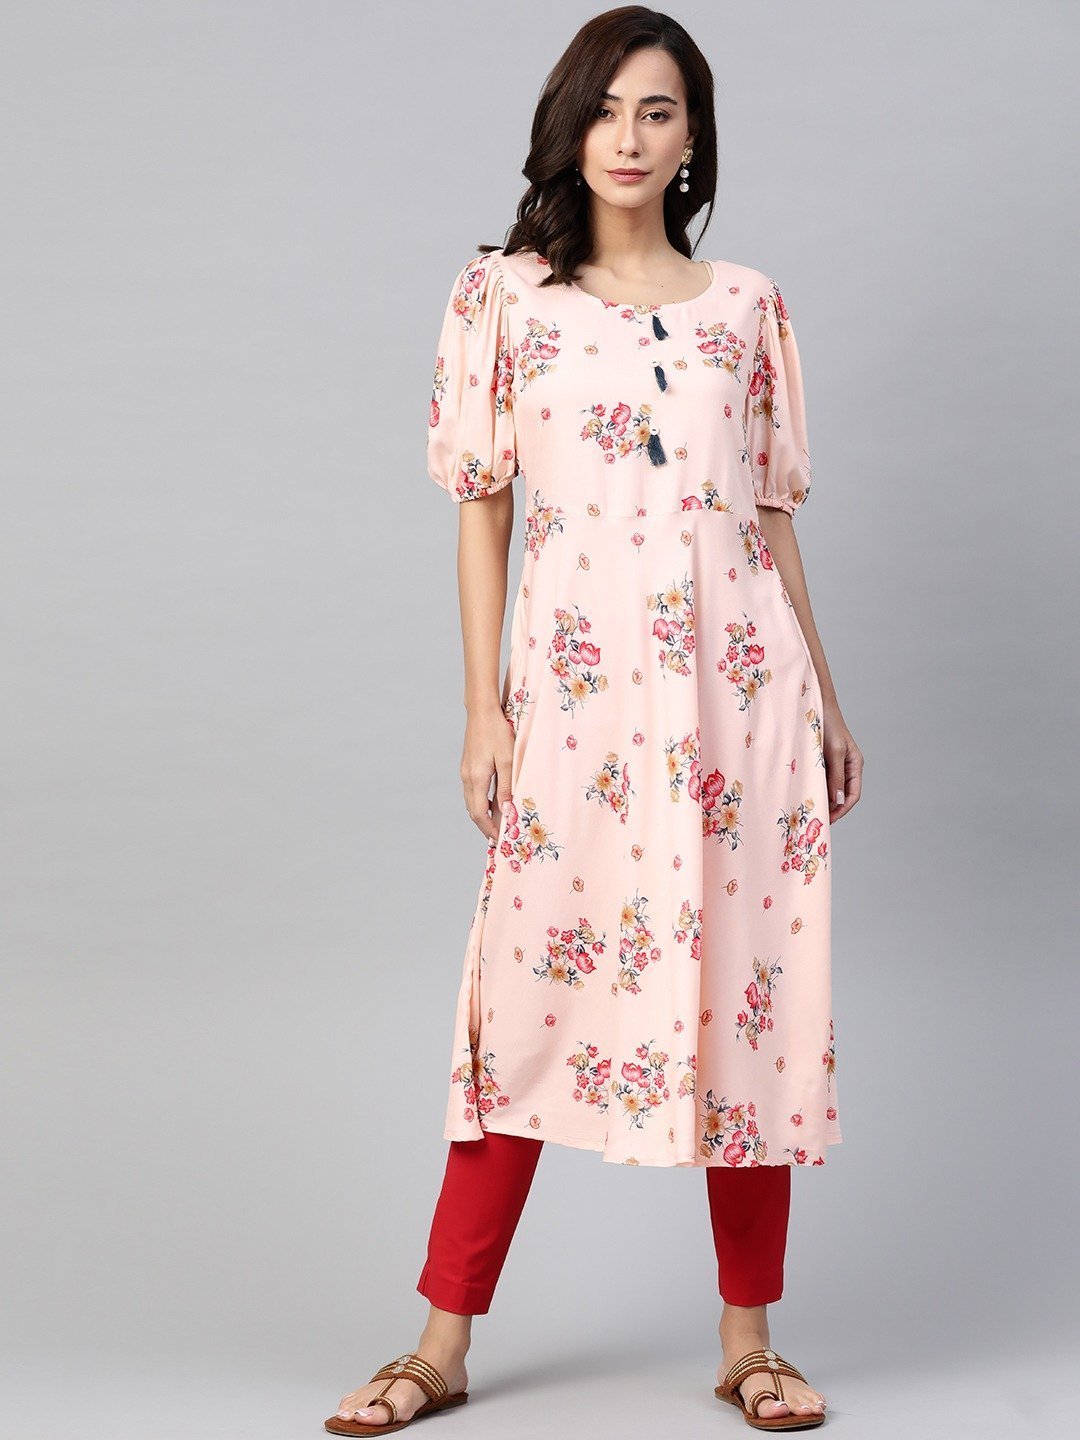 Women's Pink & Red Floral Printed A-Line Kurta - Jompers